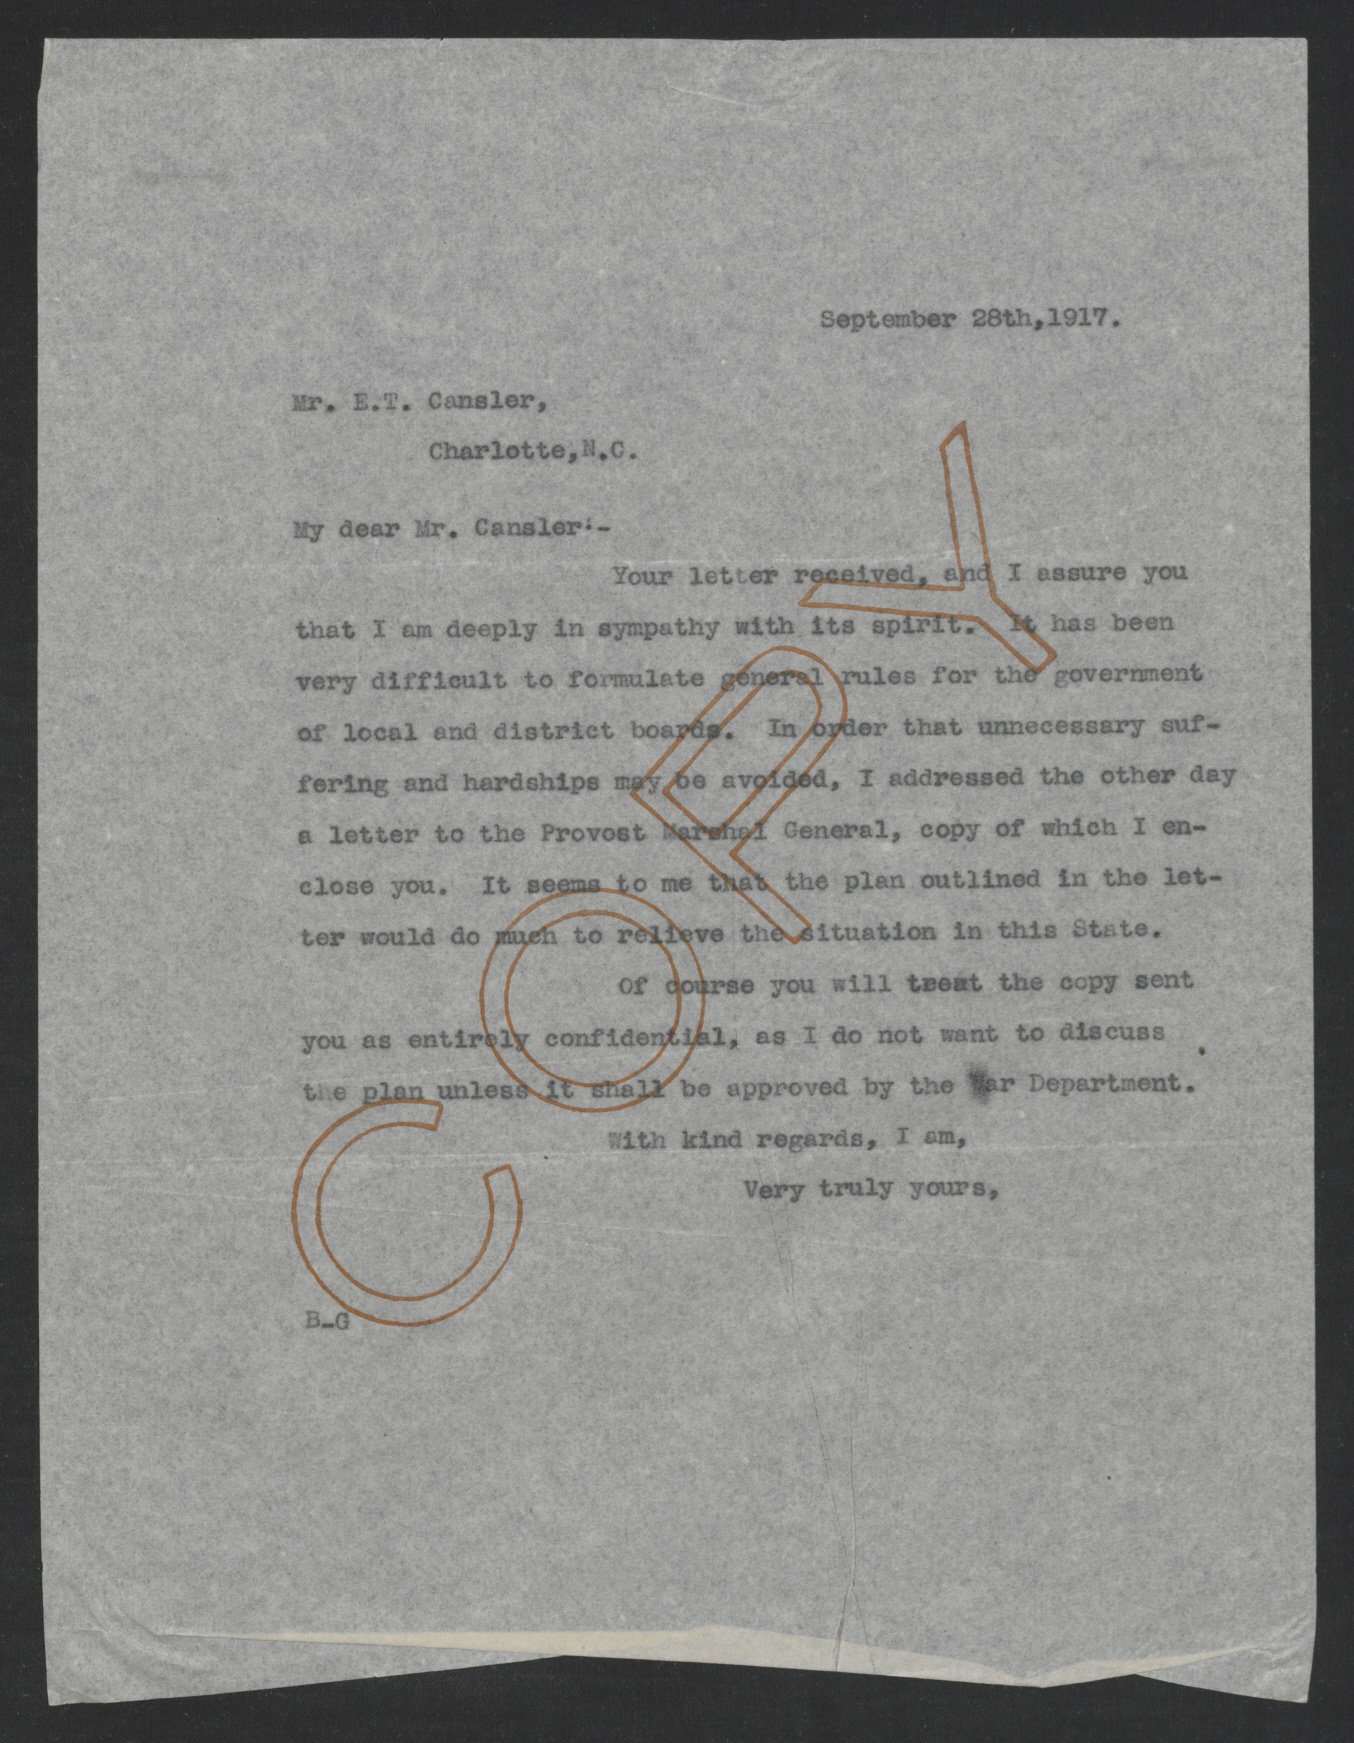 Letter from Thomas W. Bickett to Edwin T. Cansler, 28 September 1917